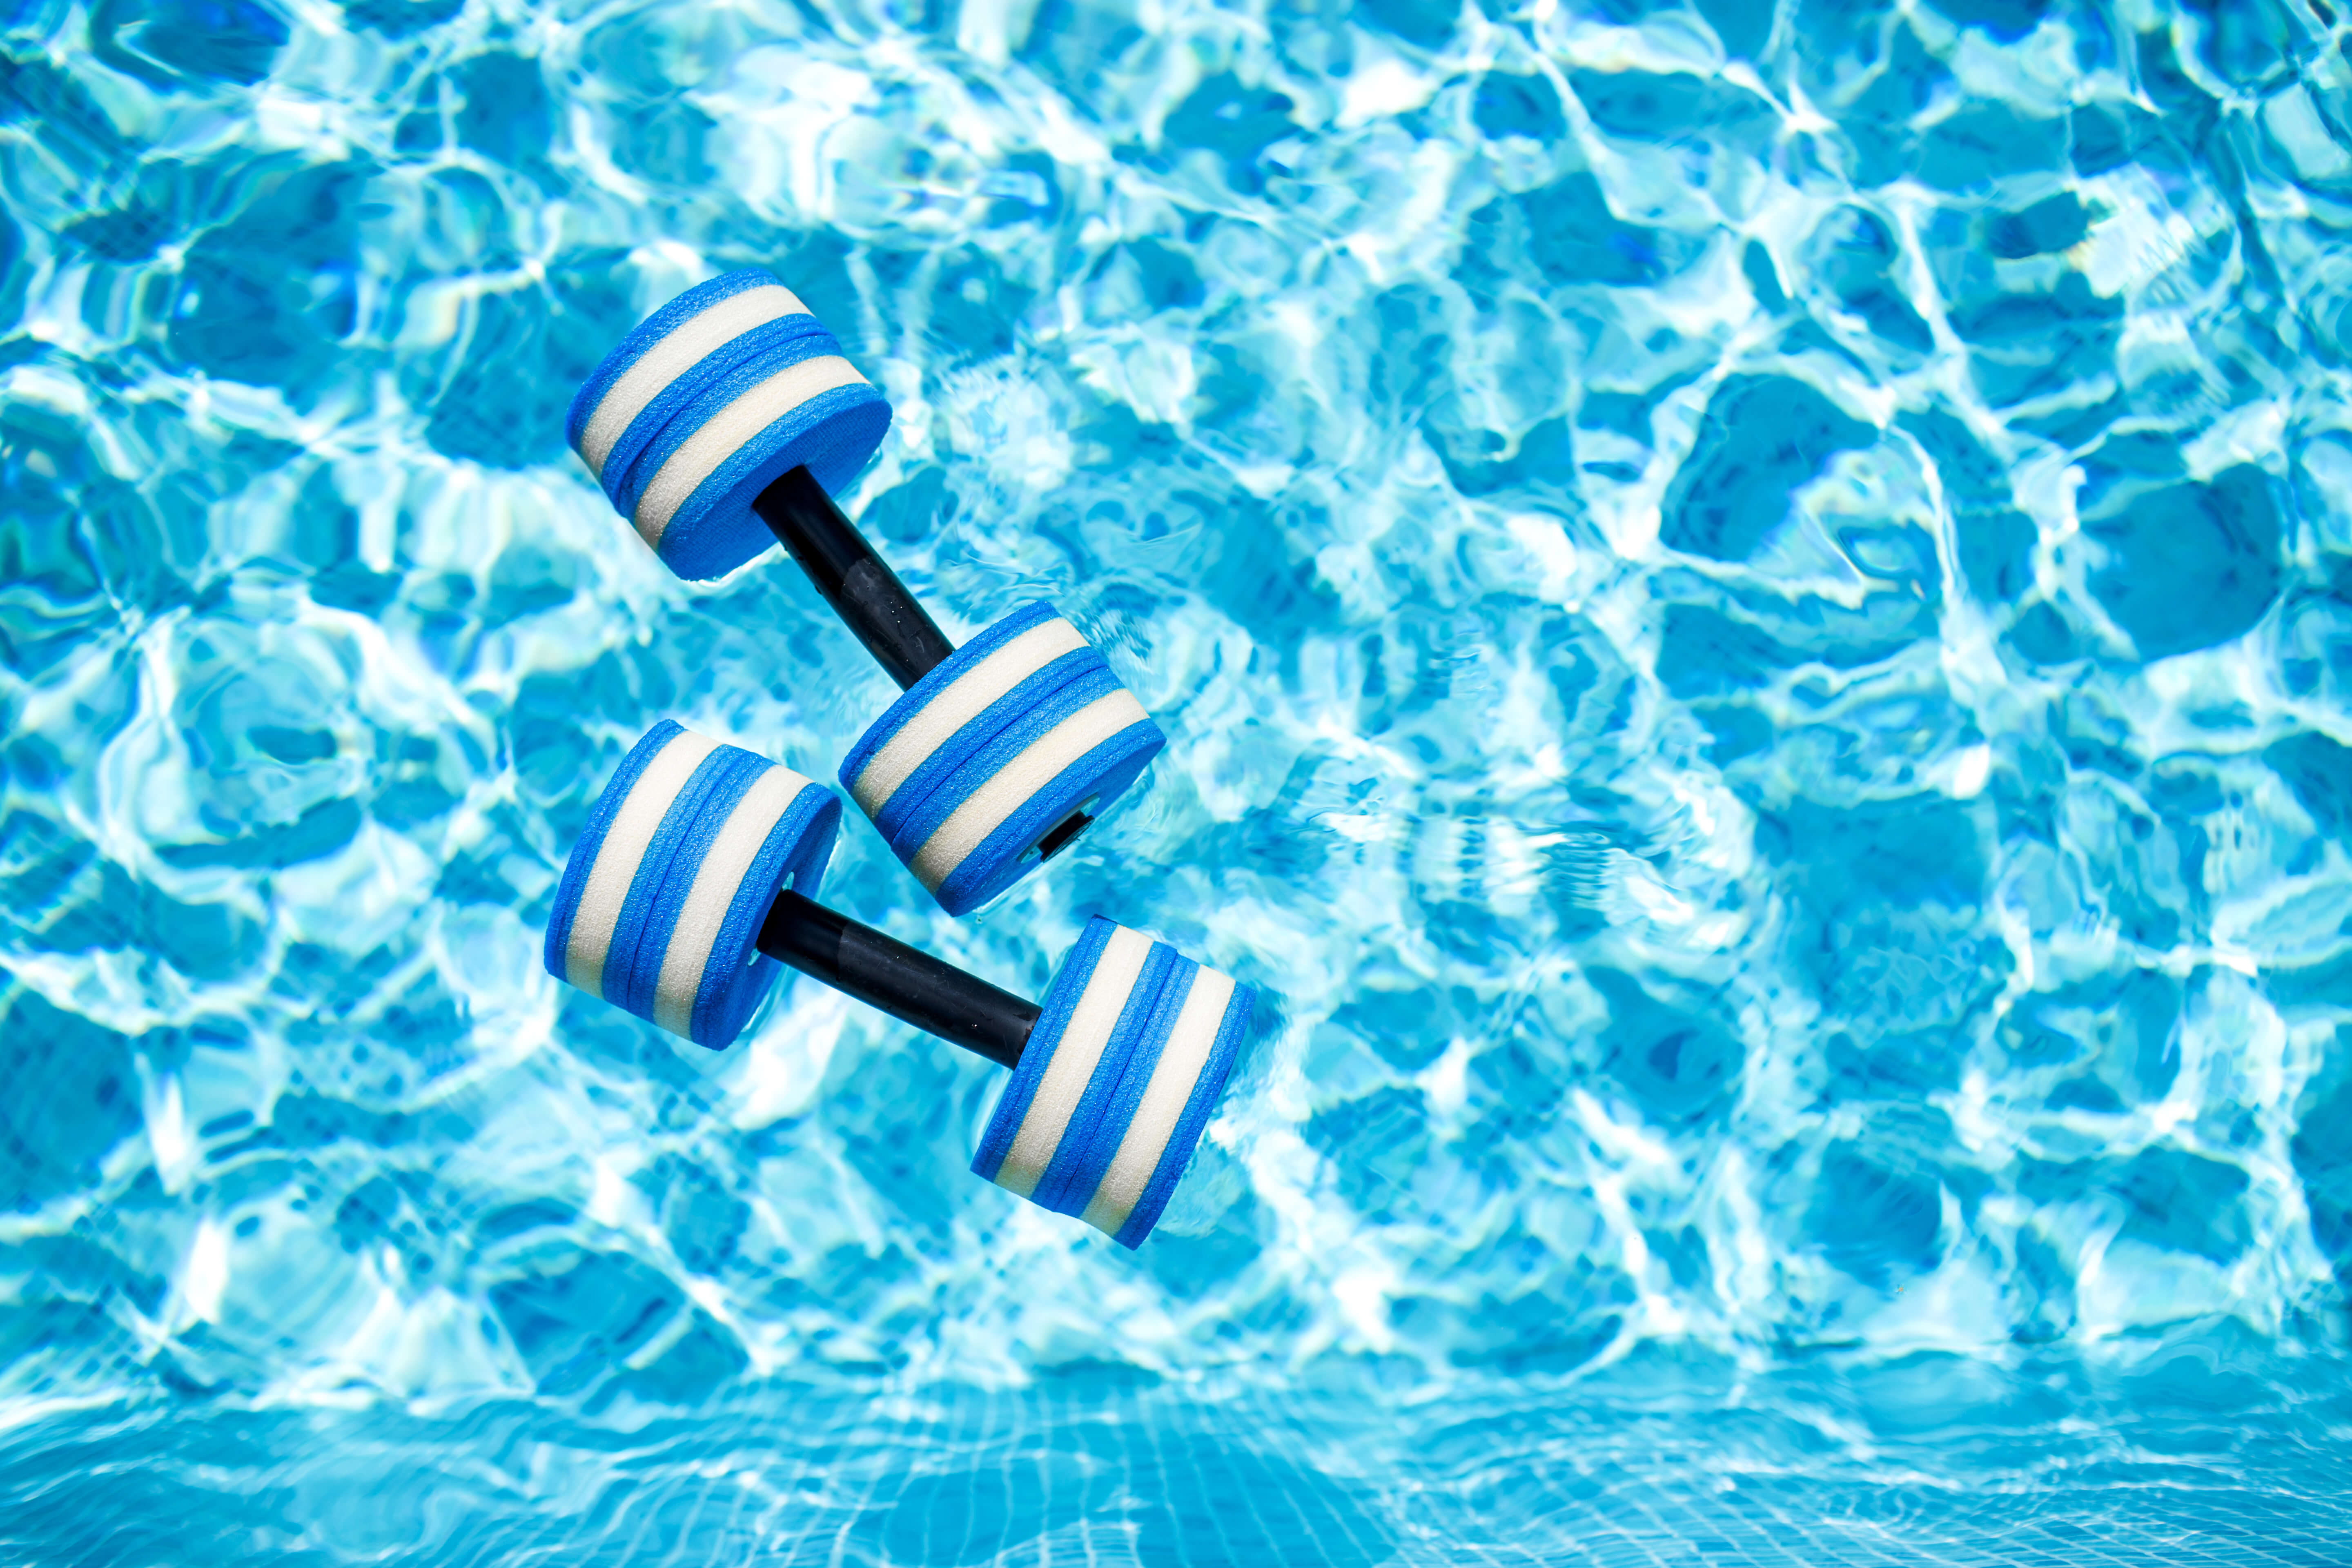 Three Therapeutic Properties of Aquatic Therapy